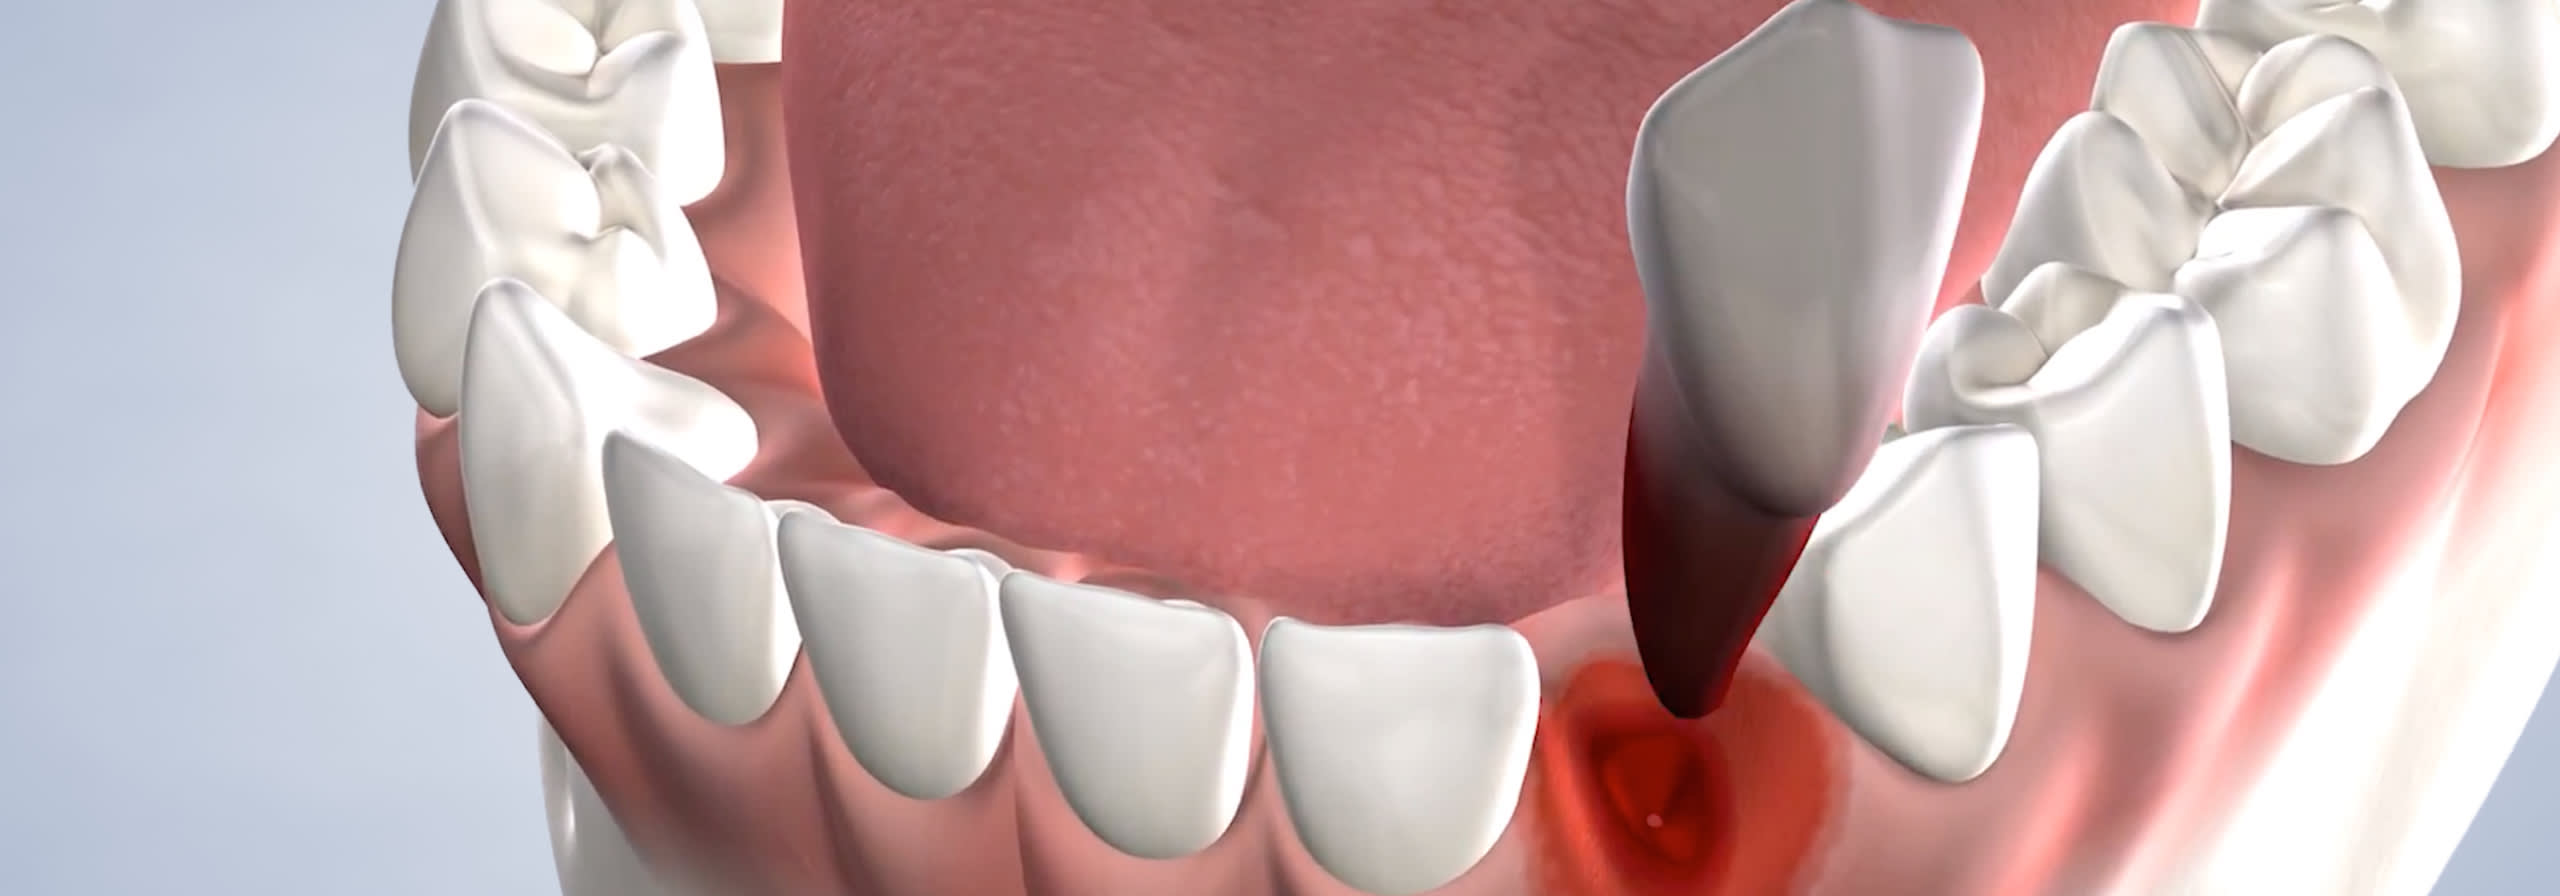 Tooth extractions in Houston, TX